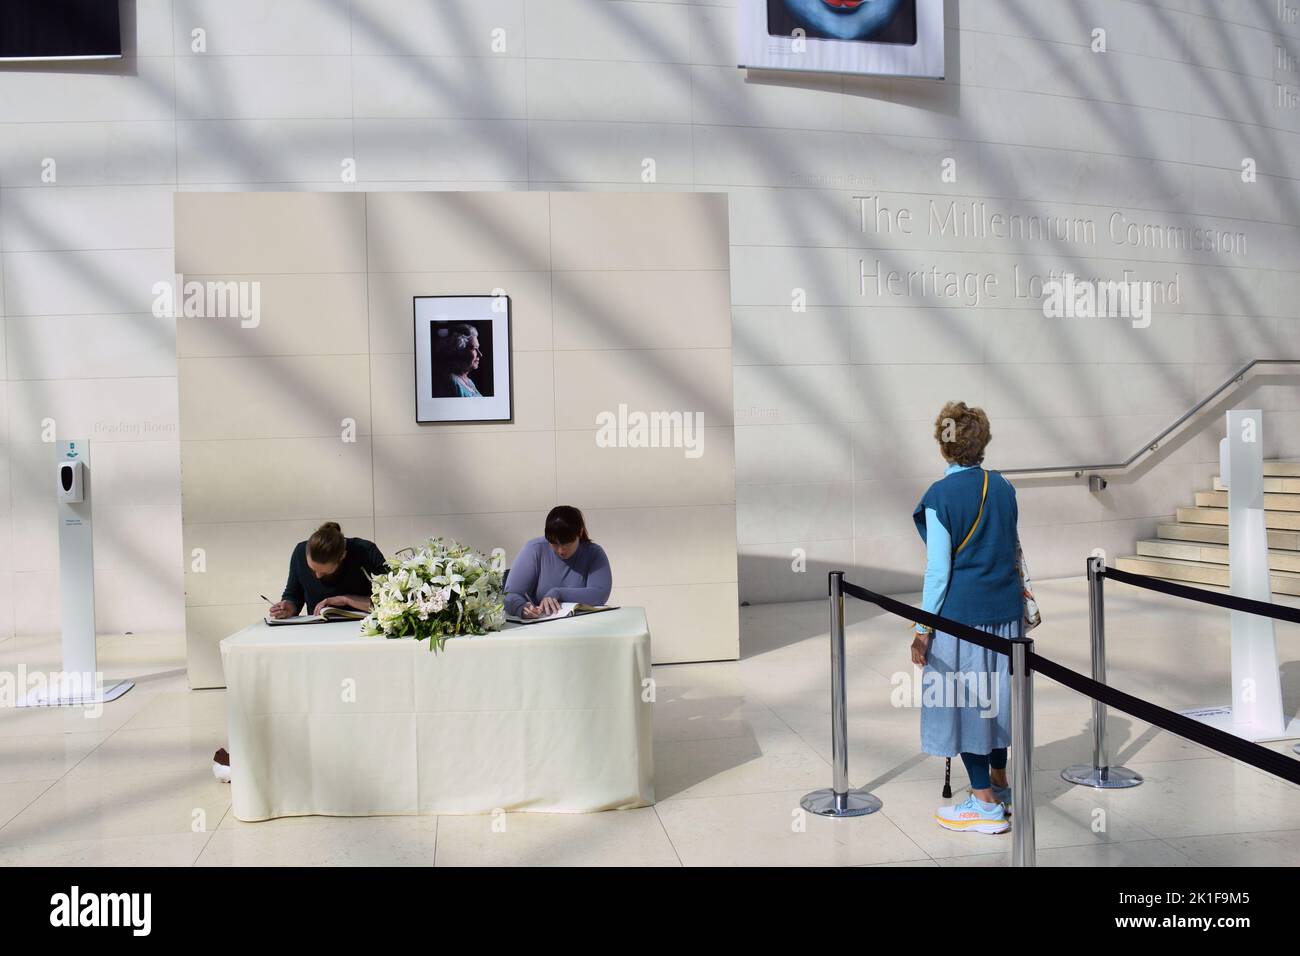 People signing Queen Elizabeth II book of remembrance at the British Museum. London UK Sep 2022 Stock Photo